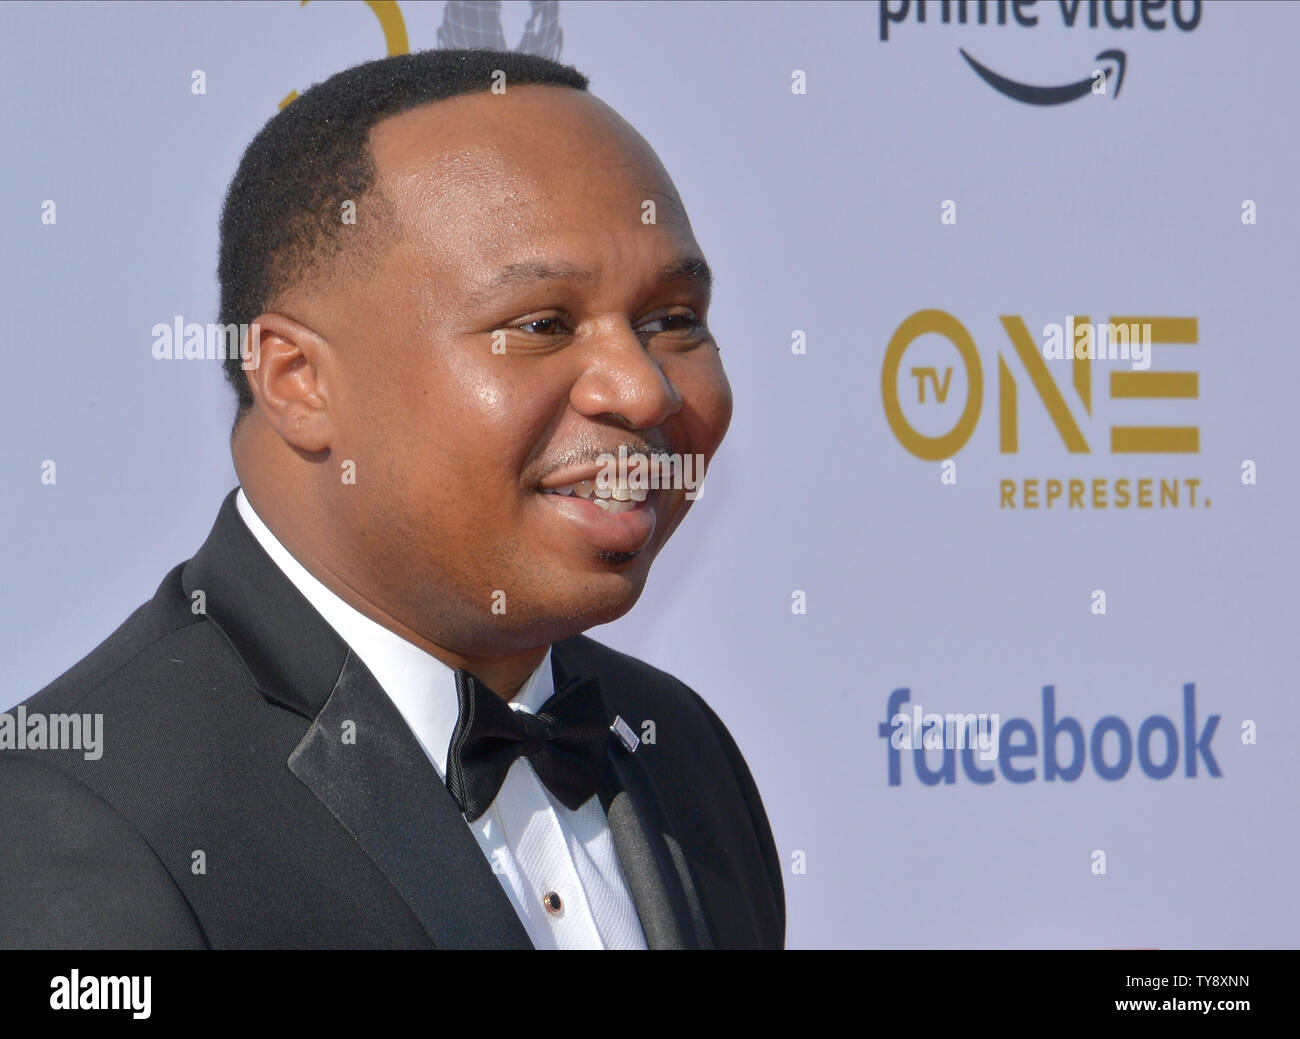 Roy Wood Jr. arrives for the 50th annual NAACP Image Awards at the Dolby  Theatre in the Hollywood section of Los Angeles on March 30, 2019. The  NAACP Image Awards celebrates the